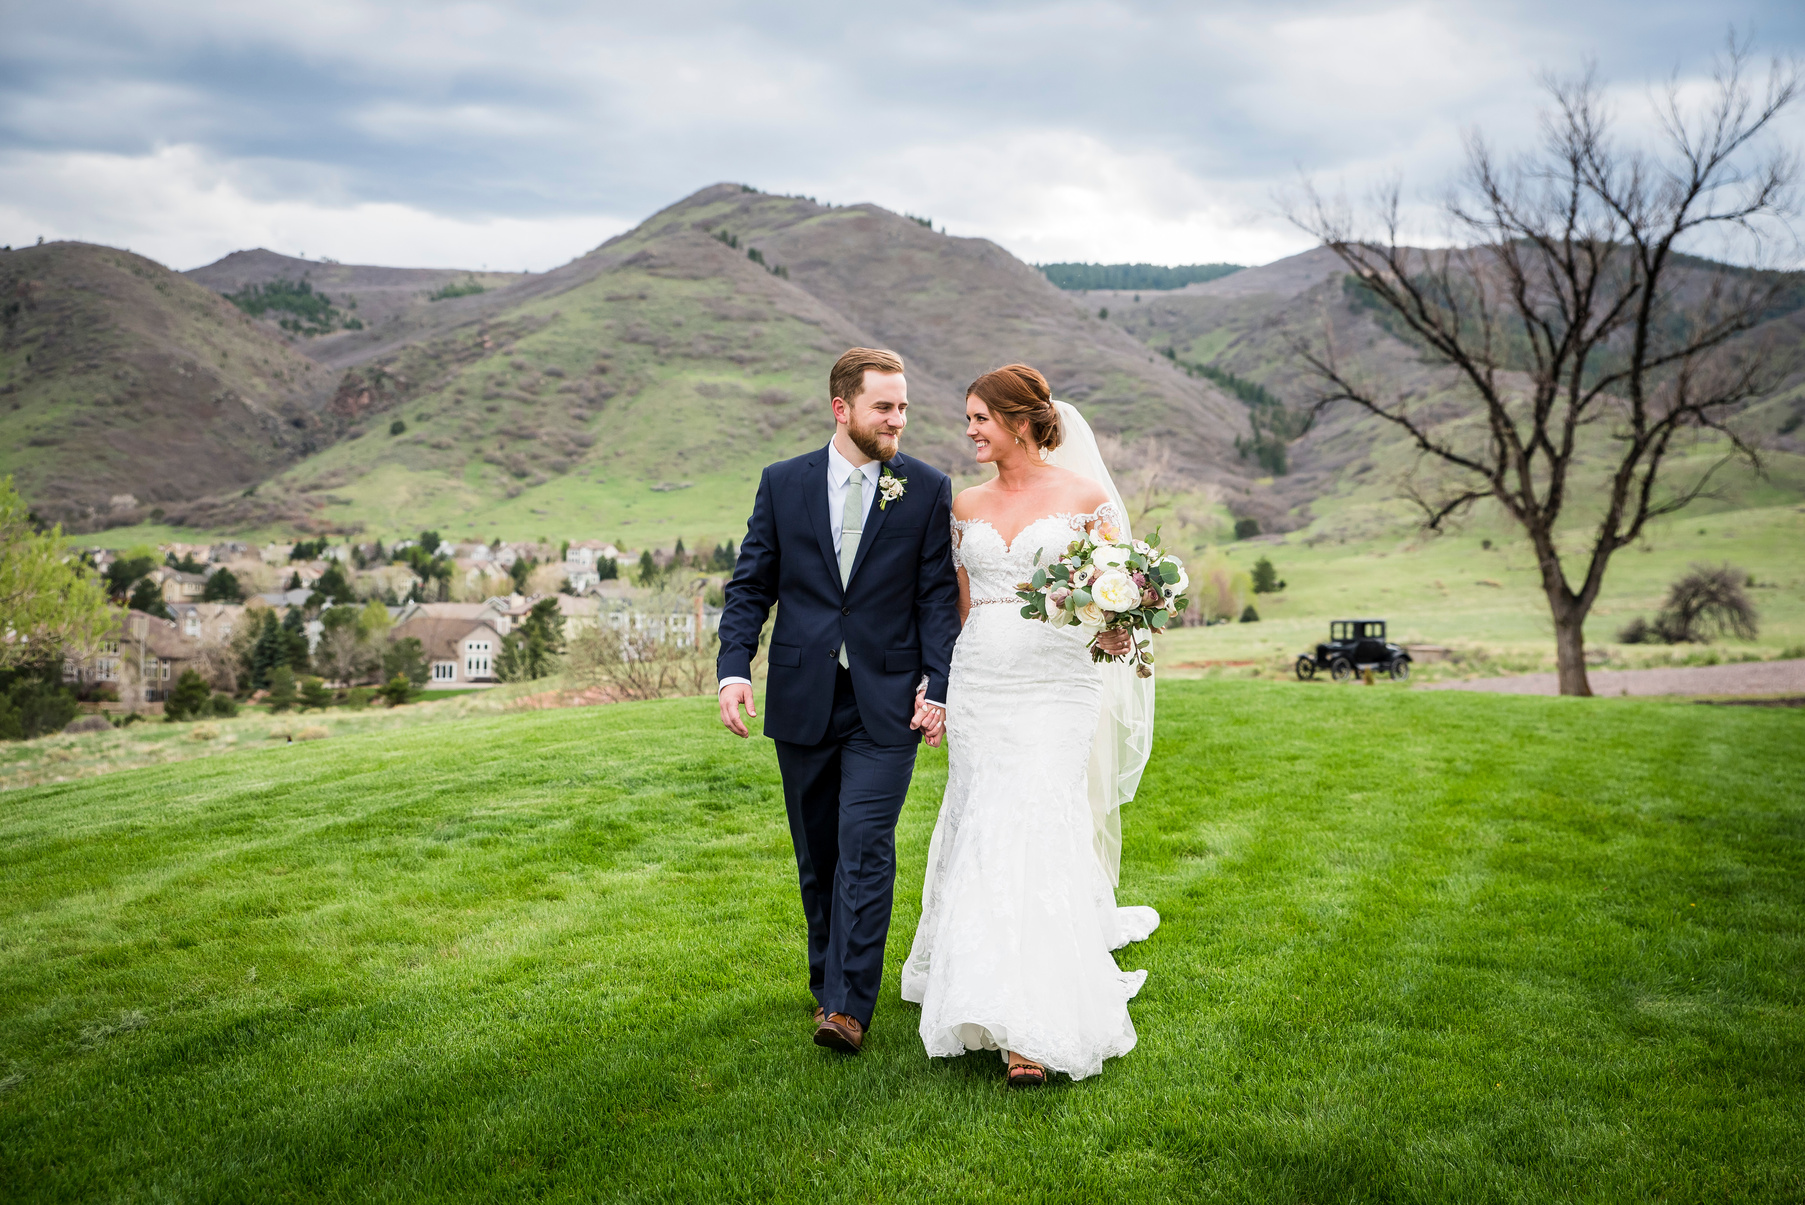 A bride and groom walking on the grass in front of the mountains at The Manor House in Littleton, Colorado.